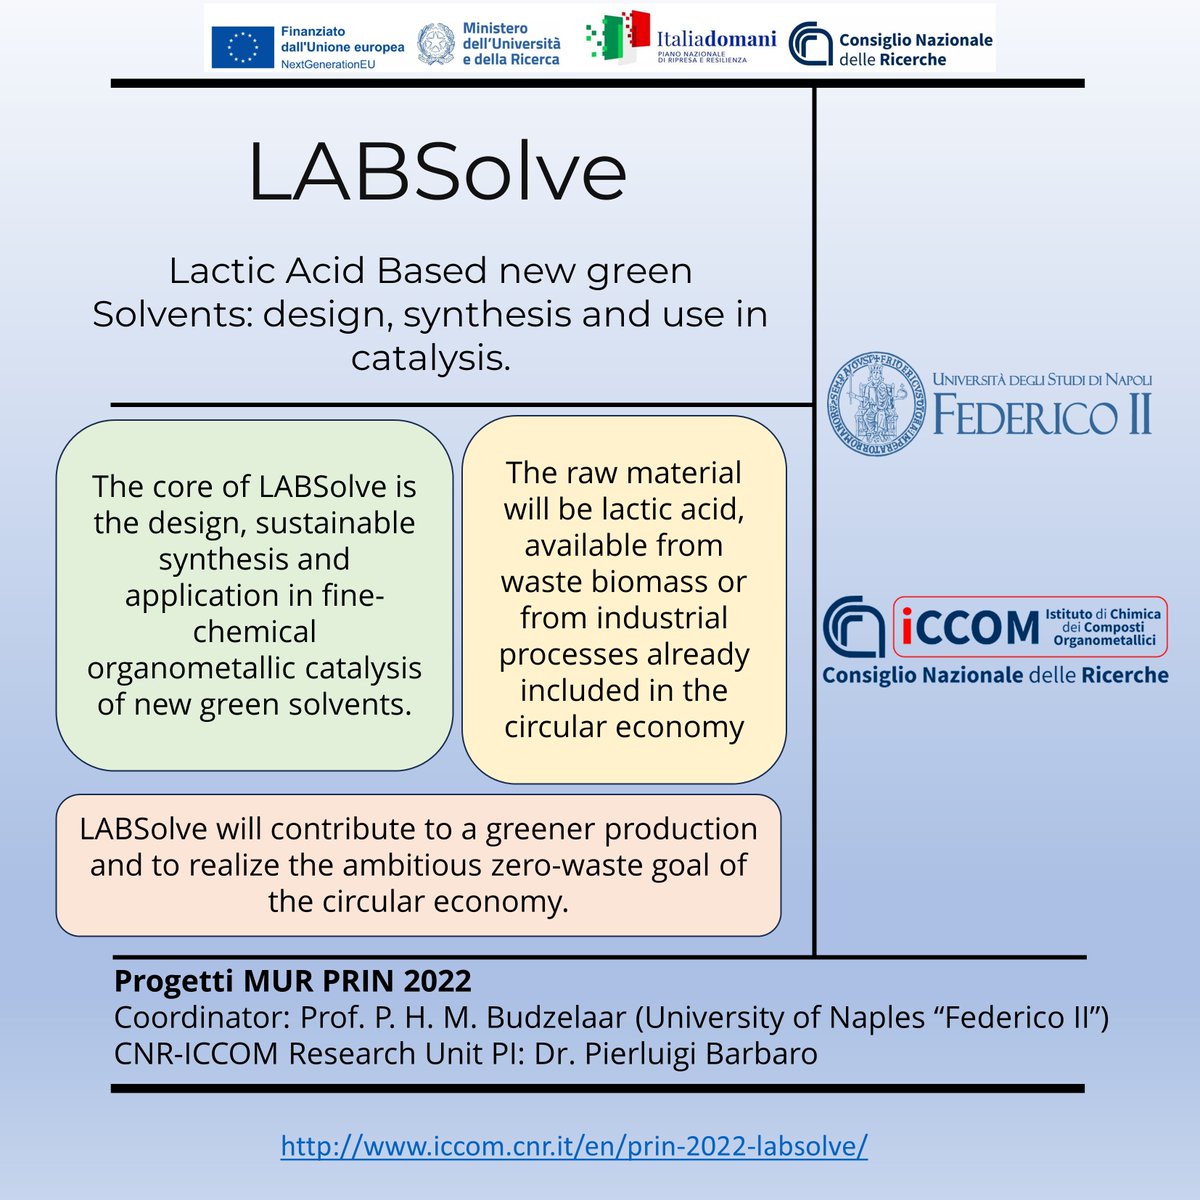 Let's talk about...PRIN! (4/7)  
We continue our discovery of the 26 #PRIN2022 and #PRIN2022PNRR projects in which #CNRICCOM researchers are involved!  Today we present #ISoTOPe,#LABSOLVE, #LUCE, and #LUMIMOF!  
Stay tuned for the next projects!  
#MUR #ResearchProjects